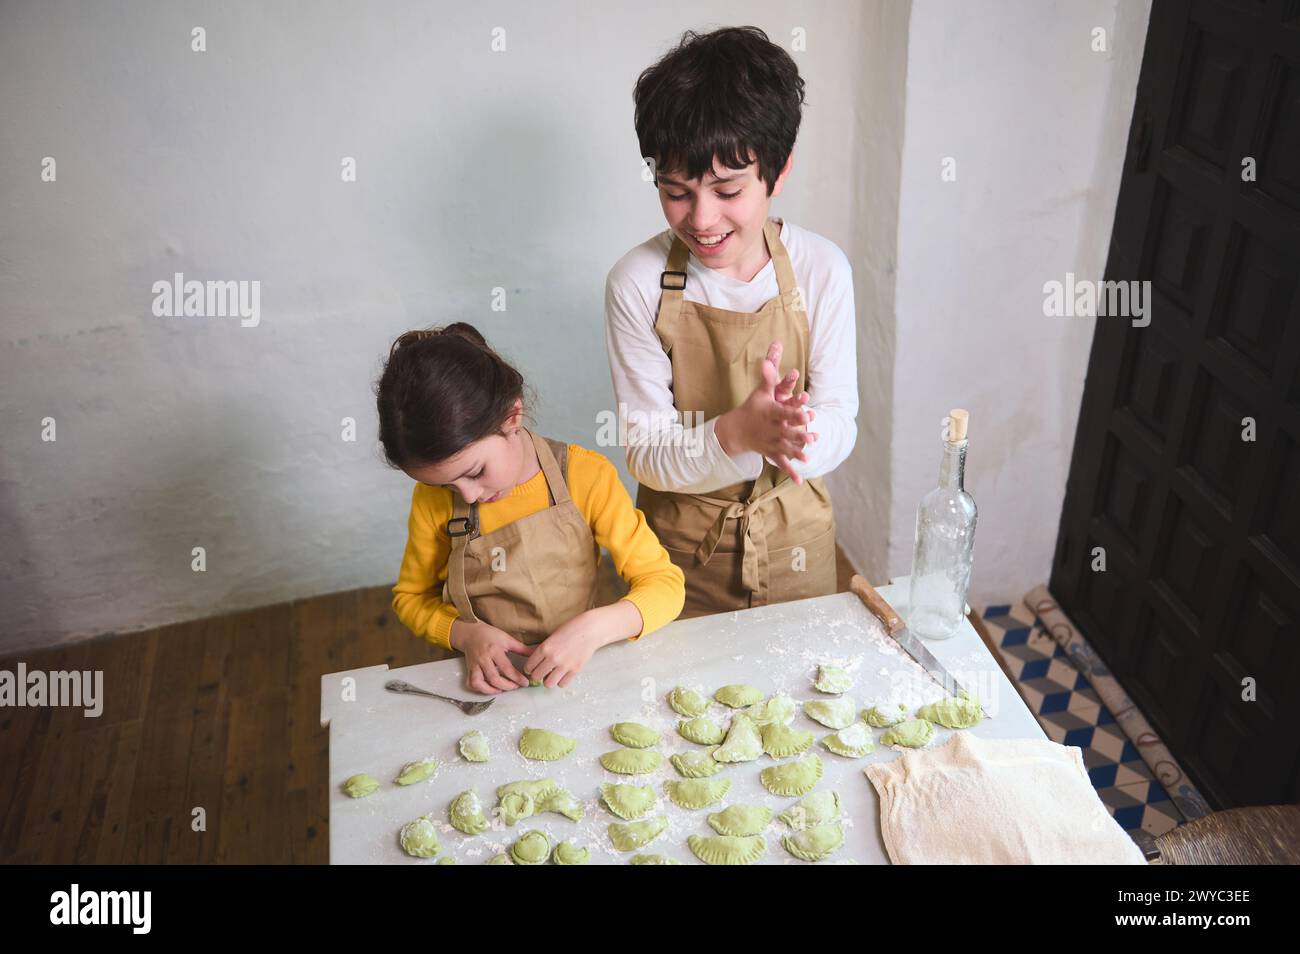 View from above of two diverse kids, a boy and a girl preparing family dinner, standing at floured kitchen table and modeling dumplings or Ukrainian v Stock Photo